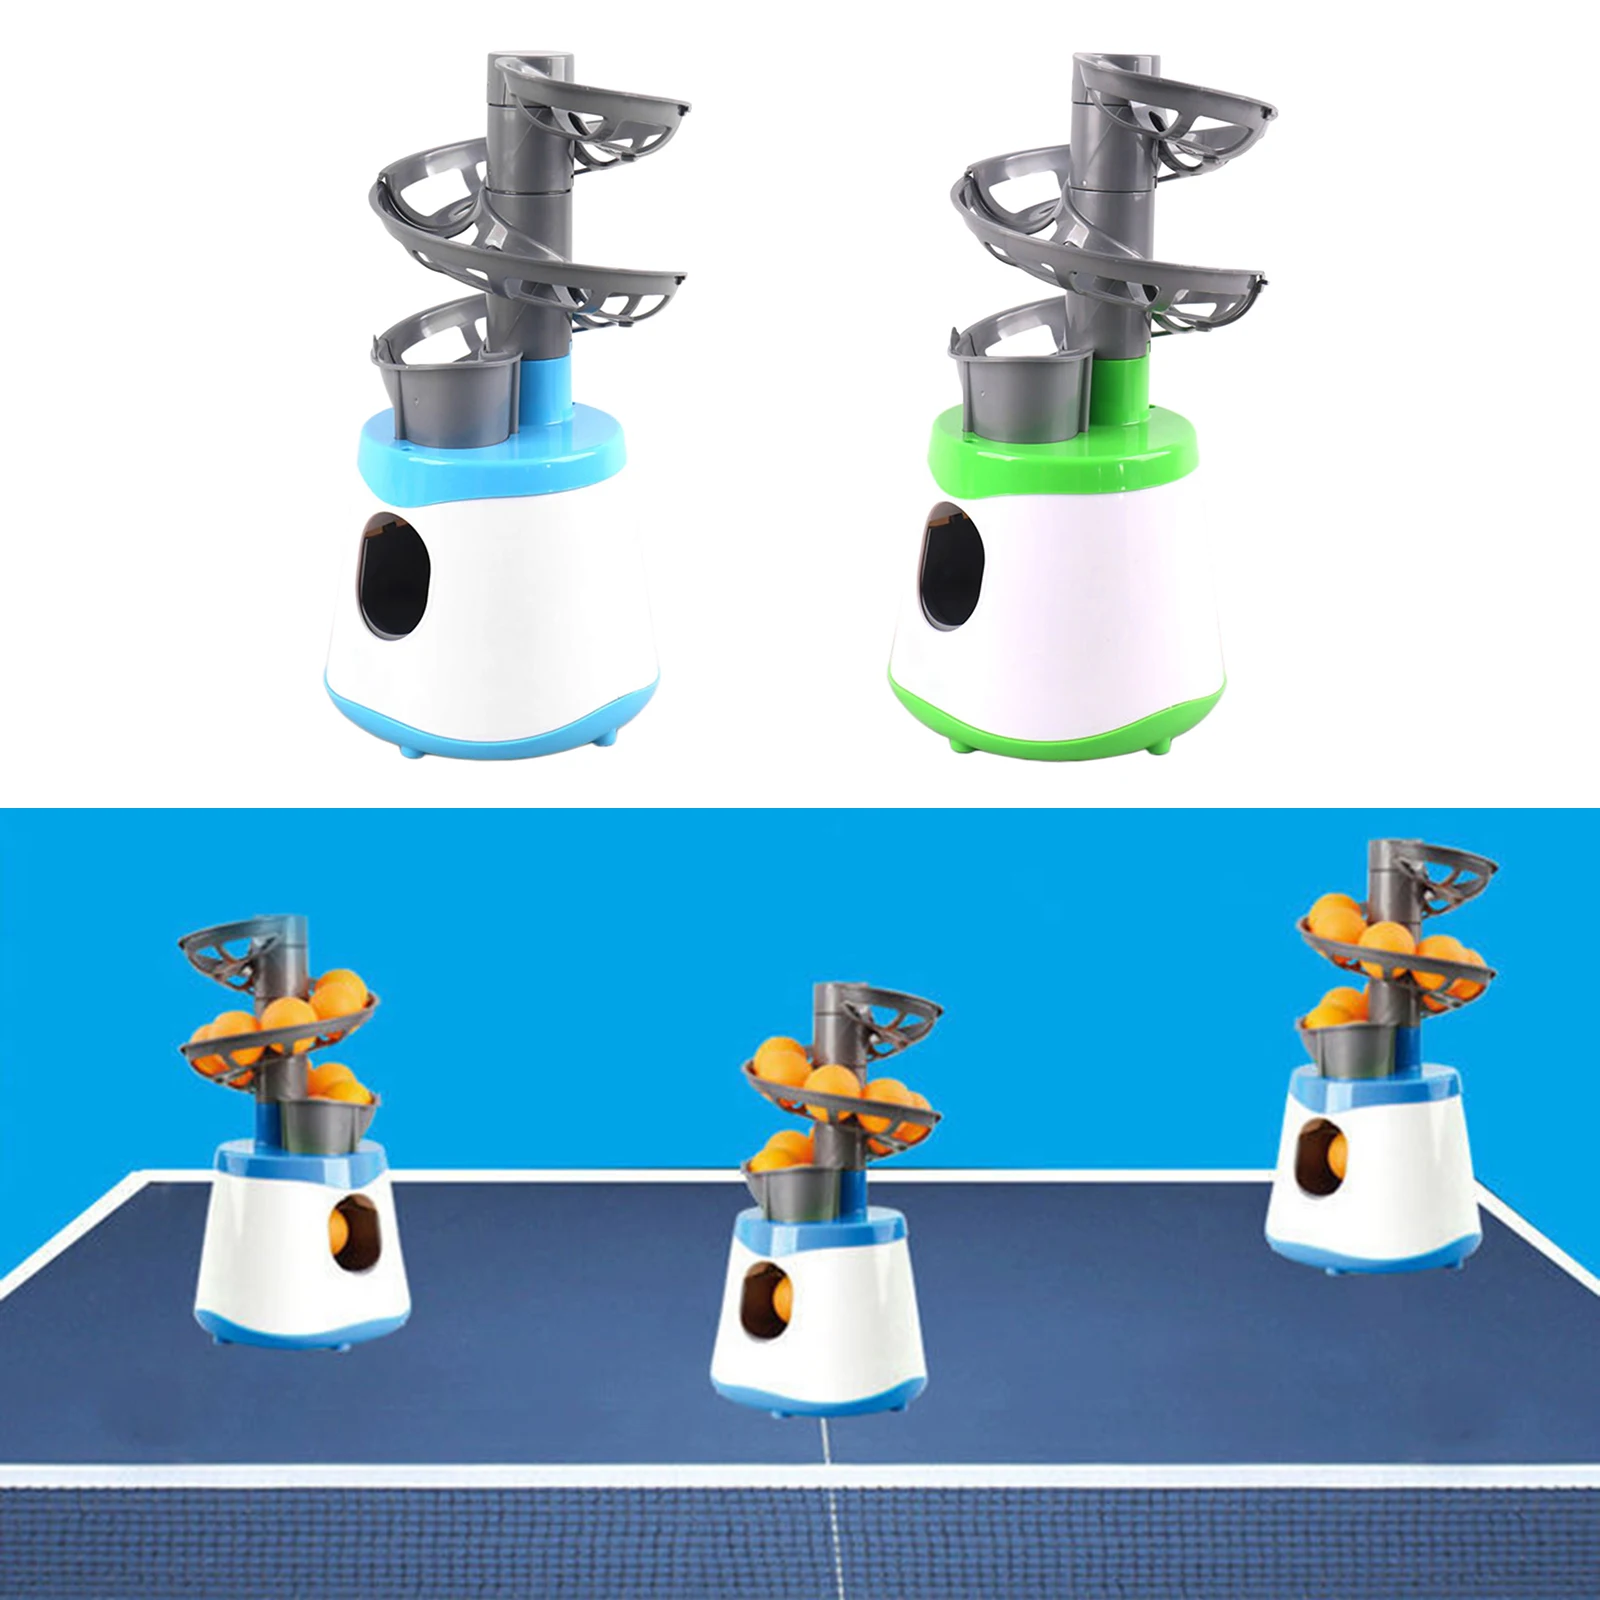 Battery Operated Mini Table Tennis Robot Service Pitching Machine Trainer Adult Kid Sport Game Gift Racquet Sports